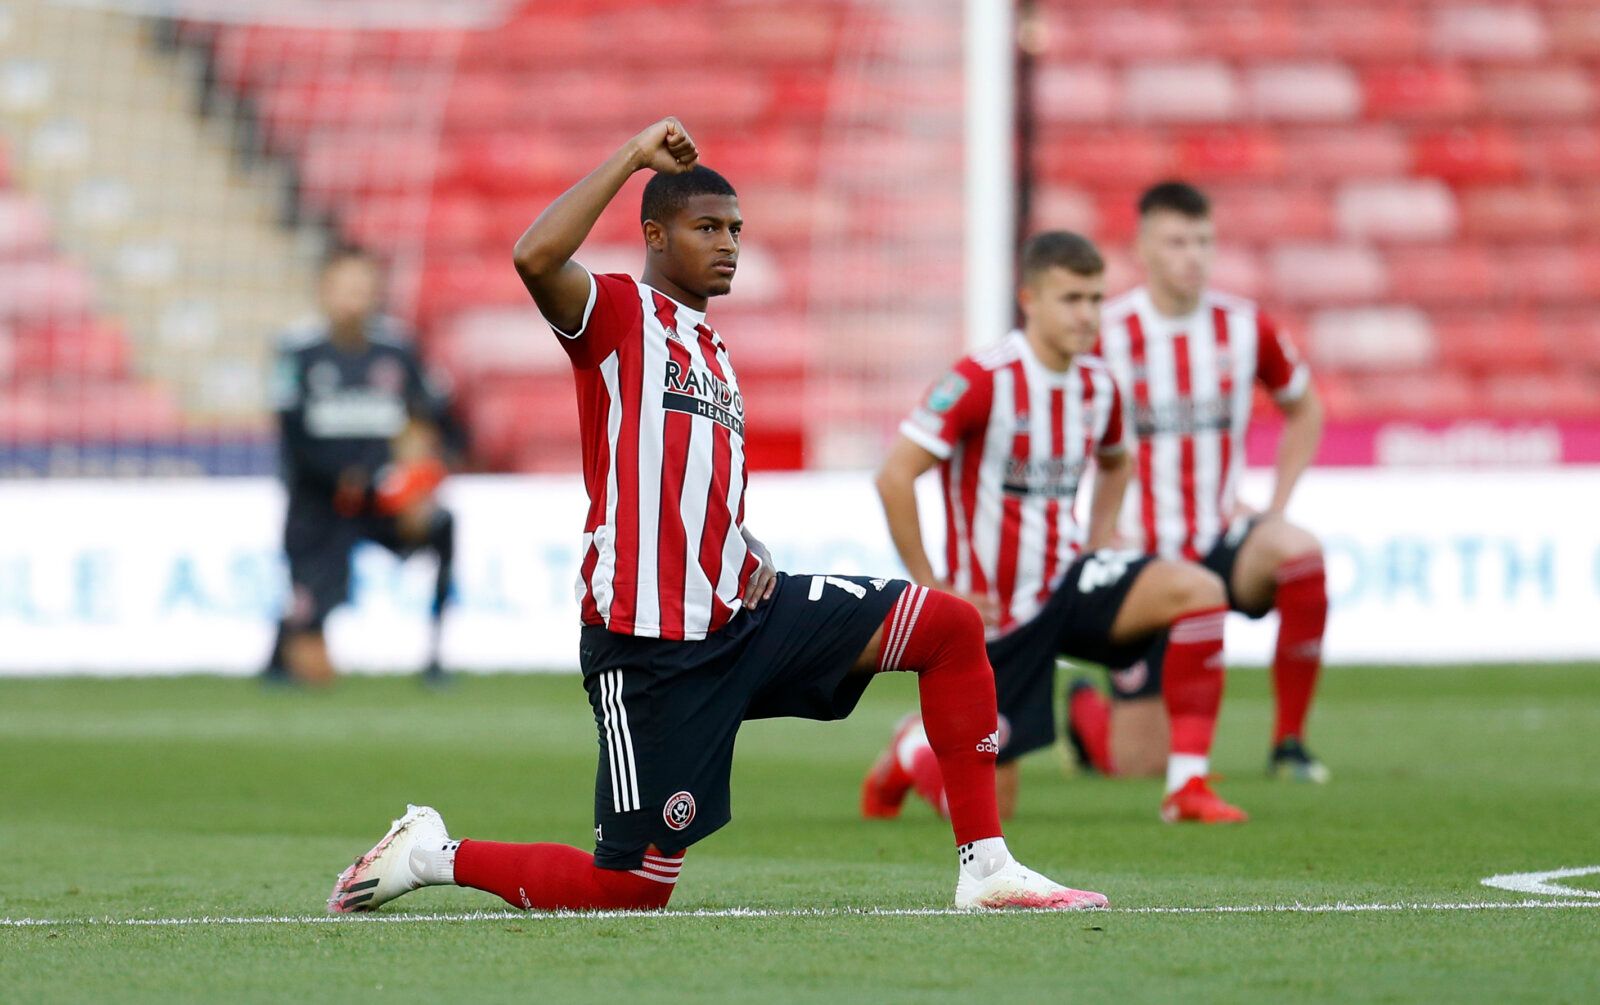 Soccer Football - Carabao Cup - First Round - Sheffield United v Carlisle United - Bramall Lane, Sheffield, Britain - August 10, 2021 Sheffield United's Rhian Brewster kneels in support of the Black Lives Matter campaign before the match Action Images/Ed Sykes EDITORIAL USE ONLY. No use with unauthorized audio, video, data, fixture lists, club/league logos or 'live' services. Online in-match use limited to 75 images, no video emulation. No use in betting, games or single club /league/player publ